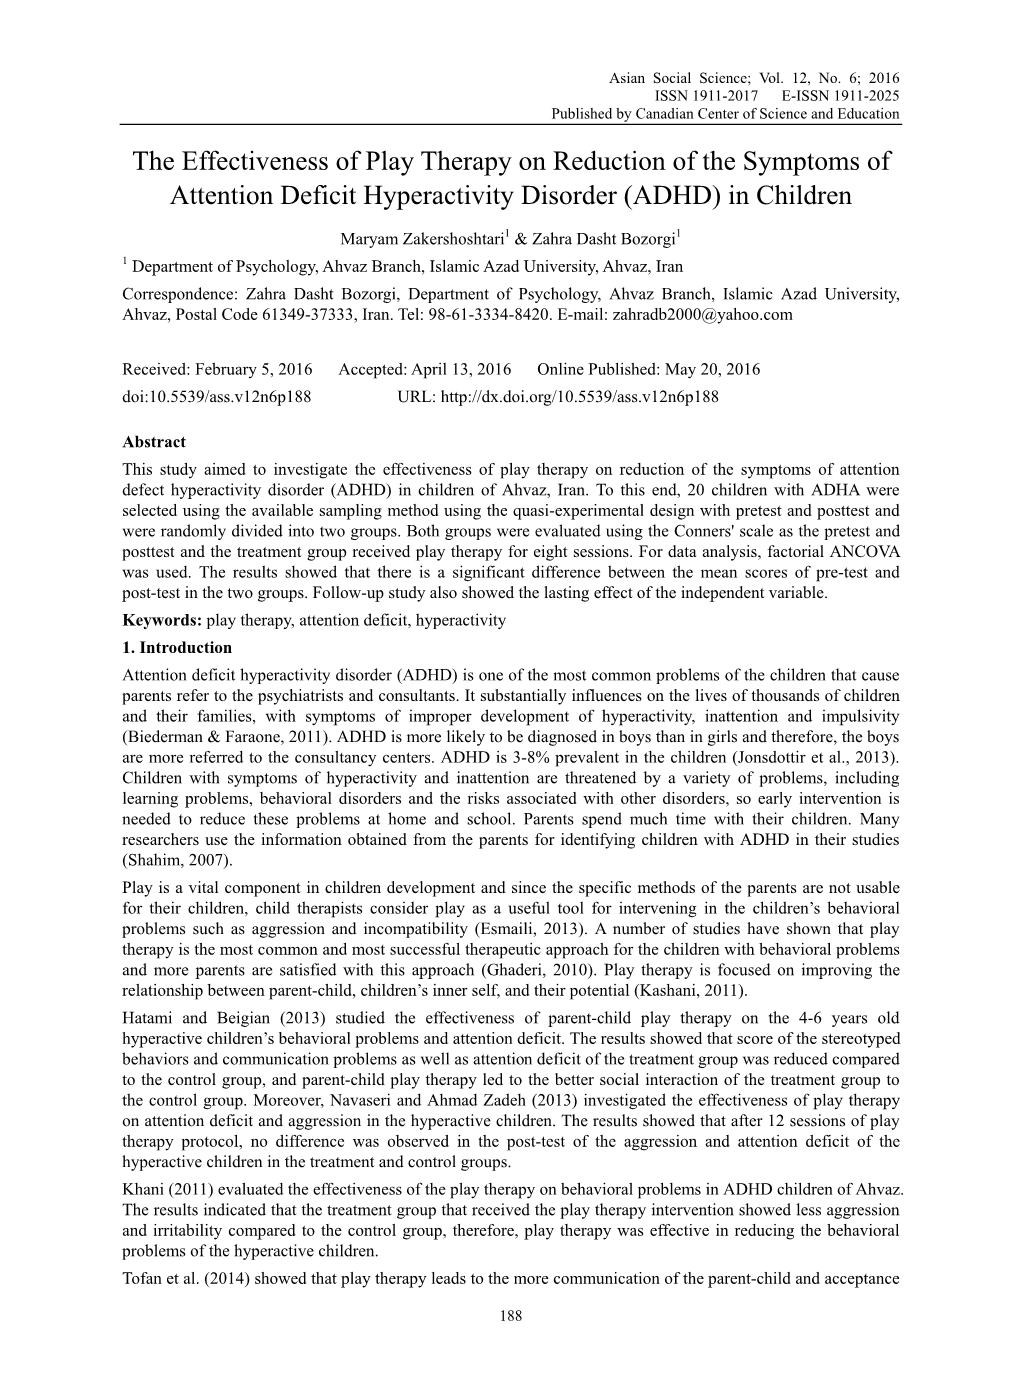 The Effectiveness of Play Therapy on Reduction of the Symptoms of Attention Deficit Hyperactivity Disorder (ADHD) in Children